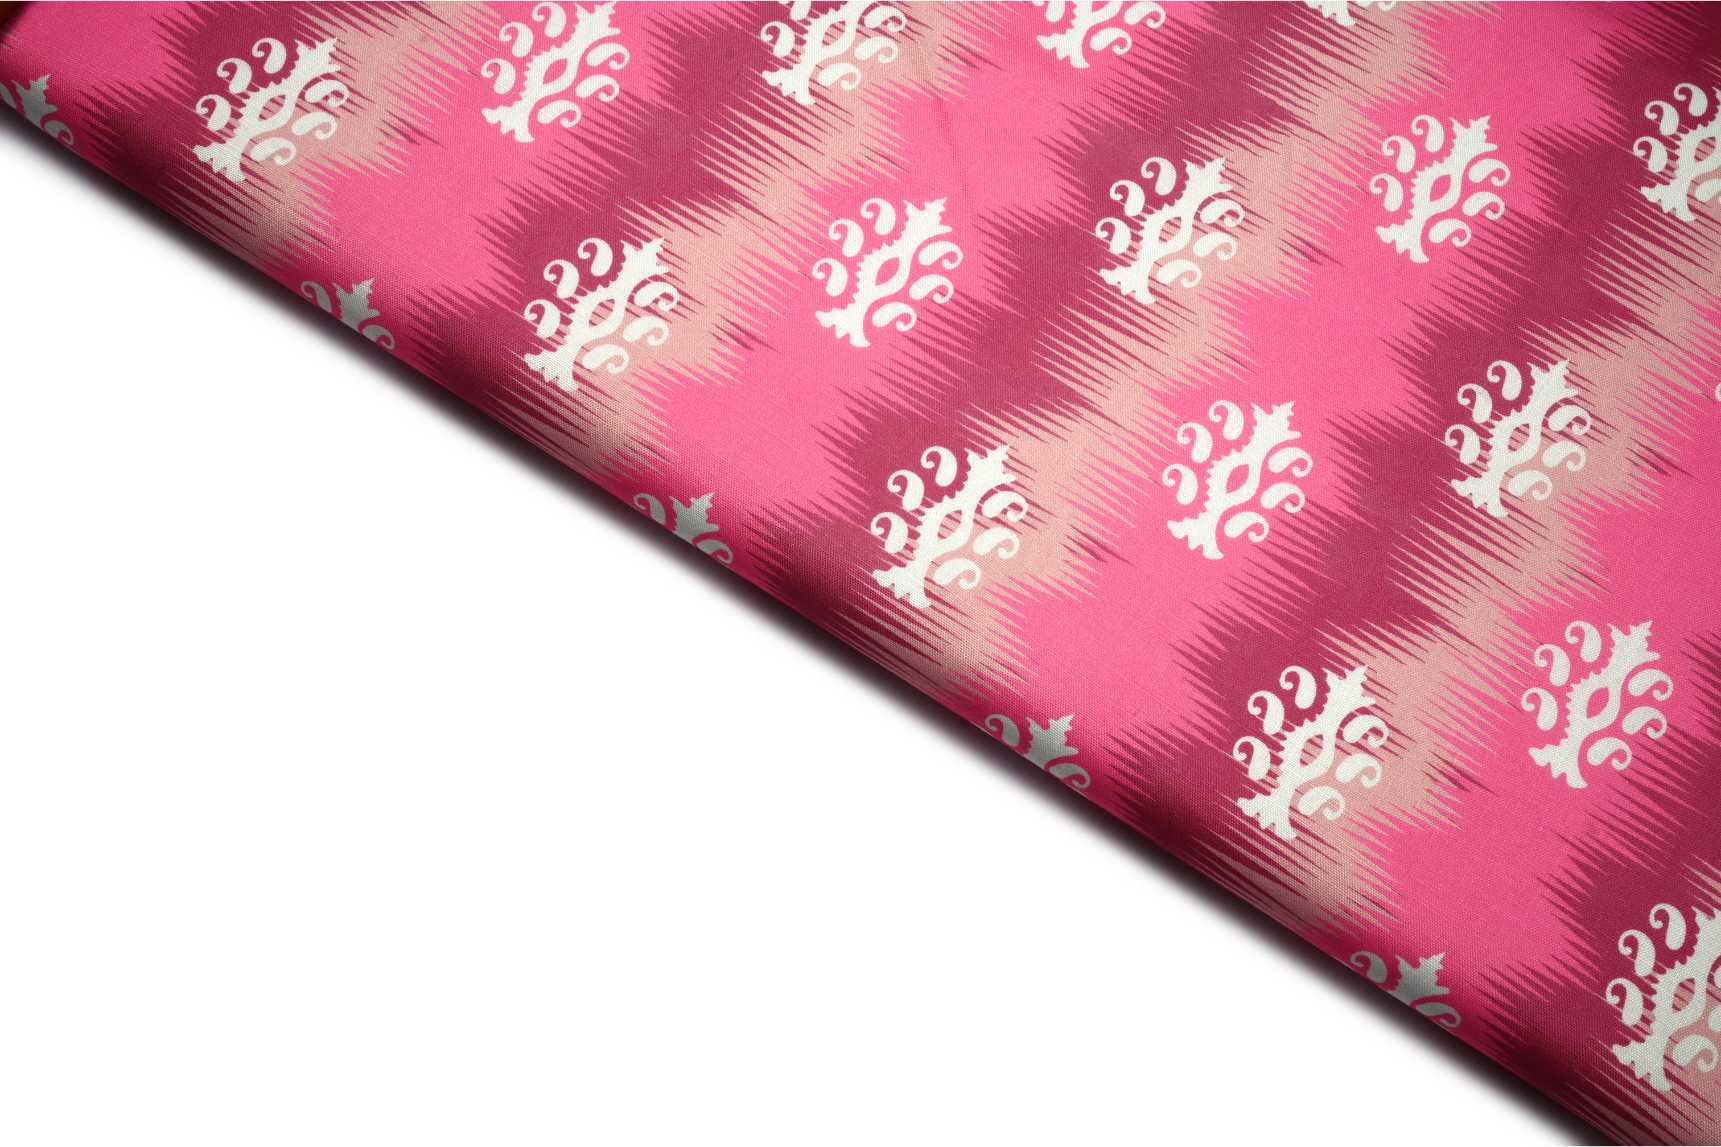 BLOSSOM PEACH COLOR POLY FLAX DIGITAL SHADED ABSTACT STRIPES WITH WHITE MOTIVE PATTERN PRINTED FABRIC 11858